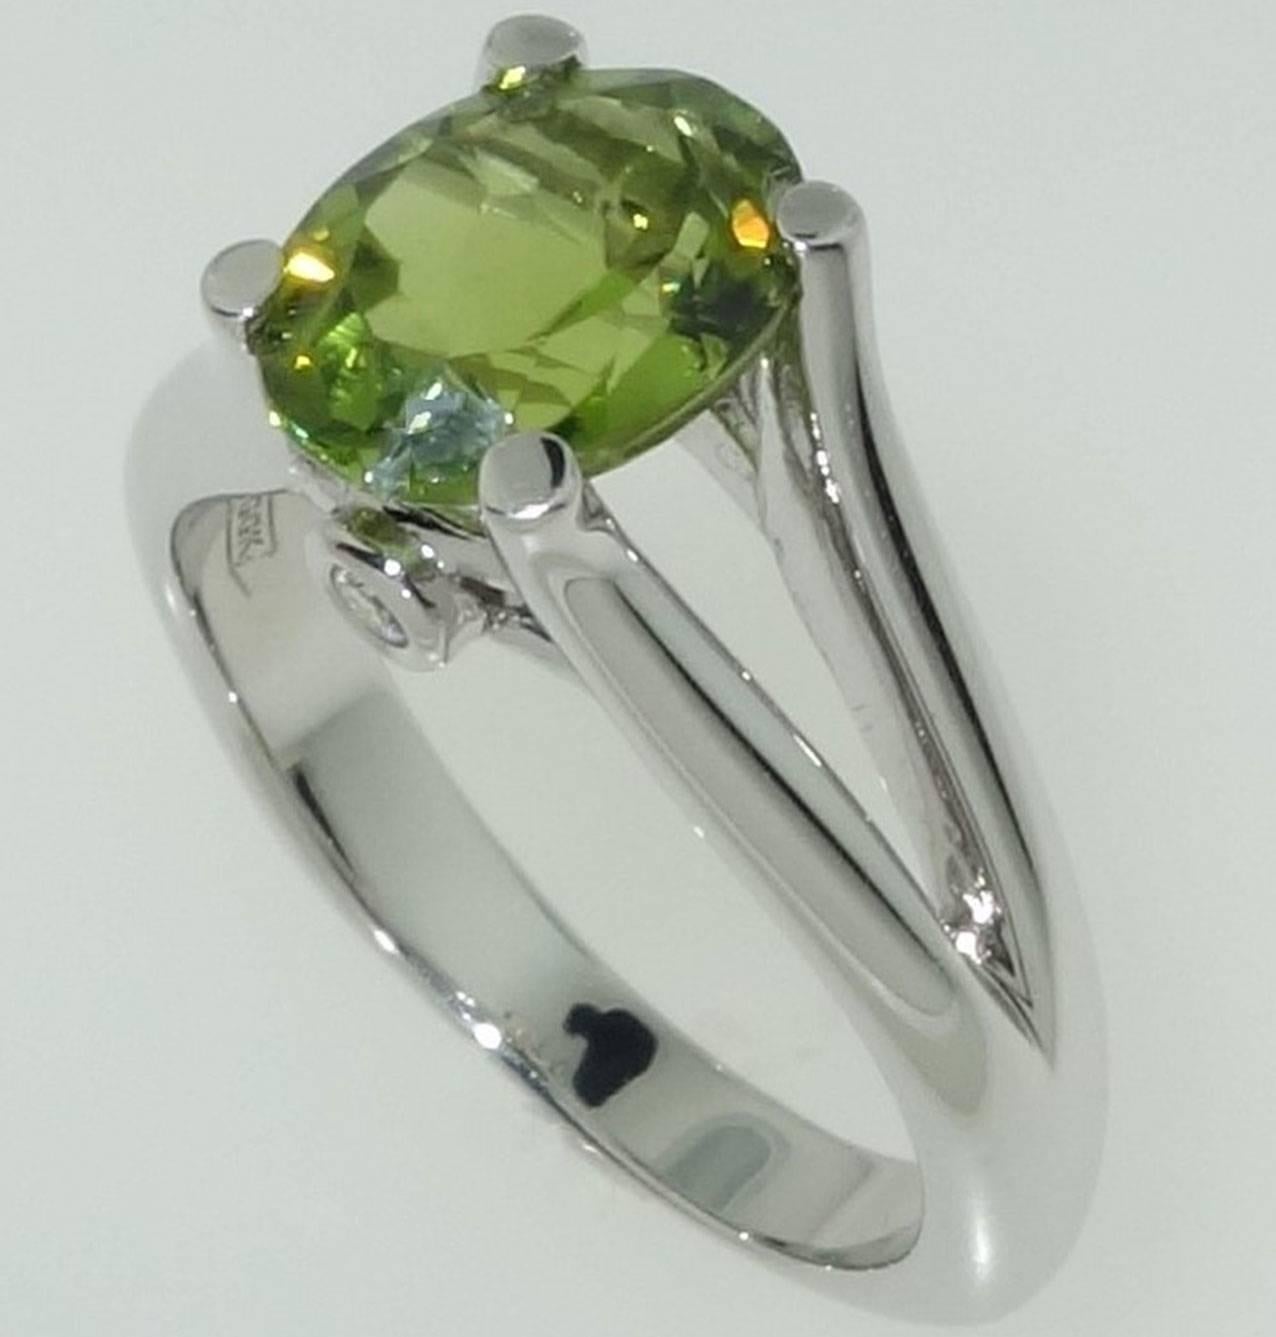 Beautiful Solitaire Ring featuring a 3.01ct Peridot, with 0.06 carat Diamonds set below.  Sterling Silver Rhodium Tarnish-resistant mounting. Size 8. Stylish and Classy…illuminating your look with Timeless Beauty! 
